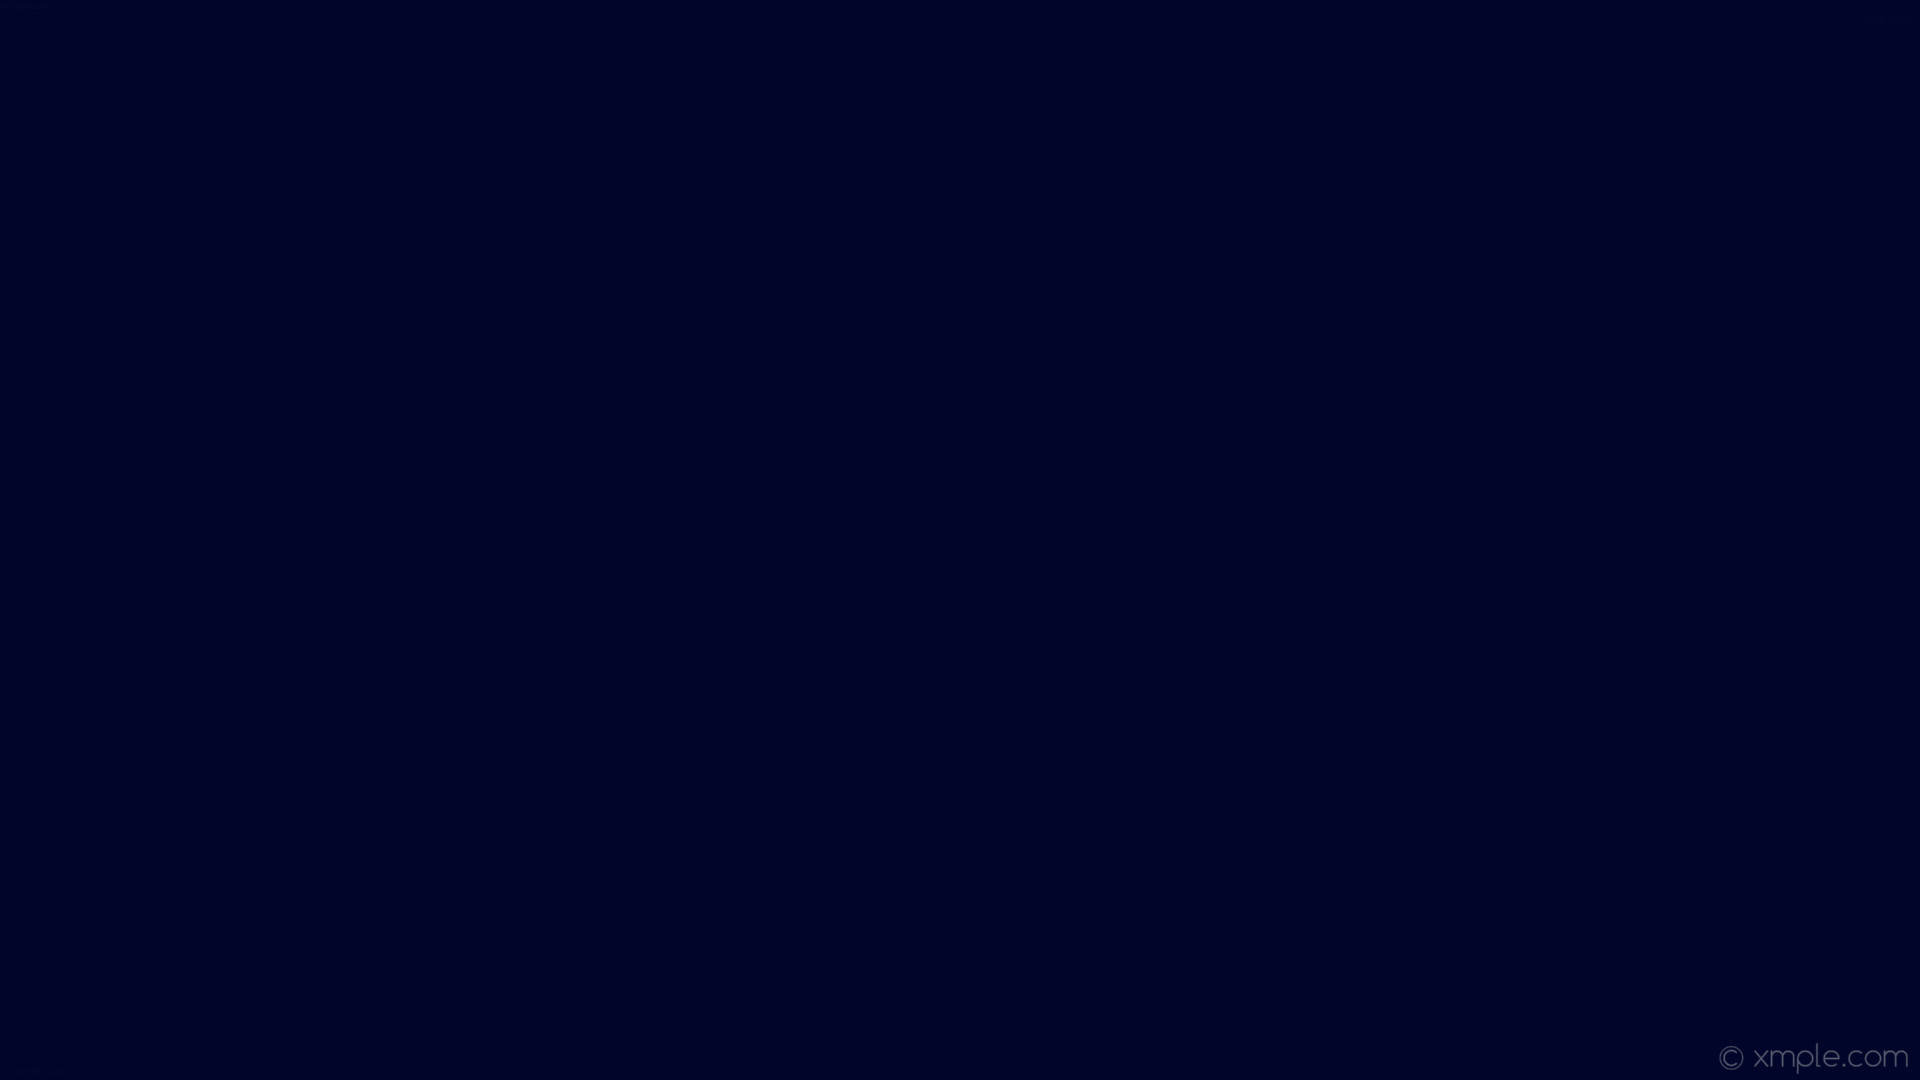 Top 999+ Solid Dark Blue Wallpaper Full HD, 4K Free to Use